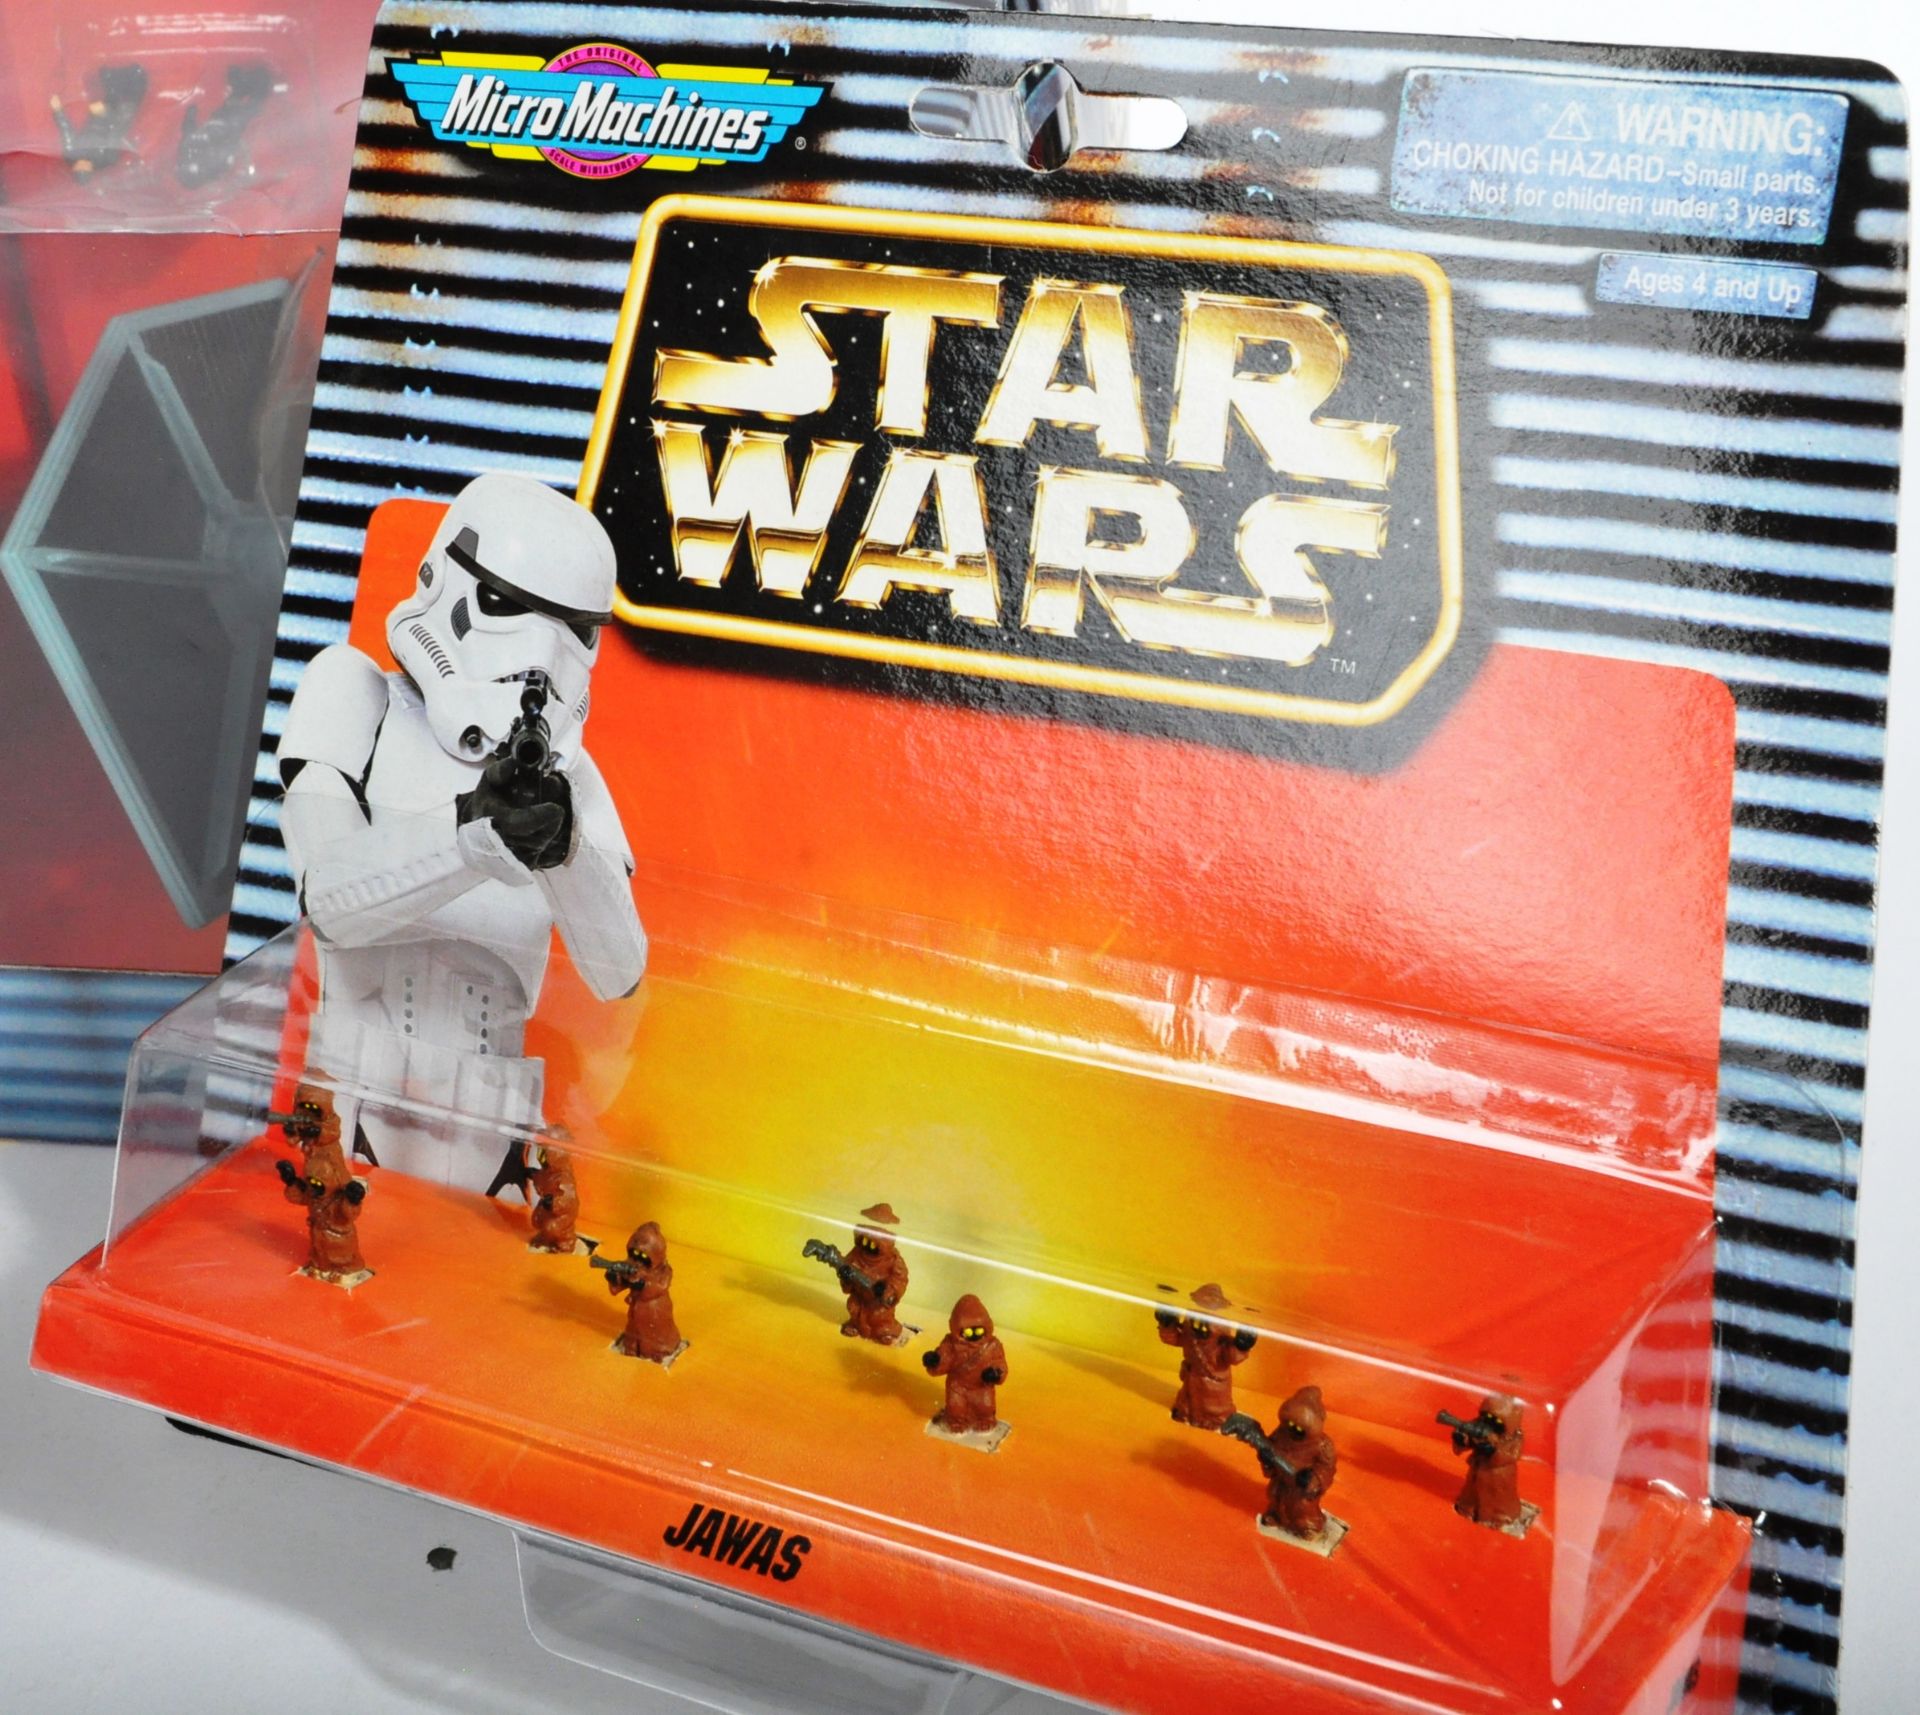 STAR WARS - COLLECTION OF FACTORY SEALED MICROMACHINES PLAYSETS - Image 2 of 5